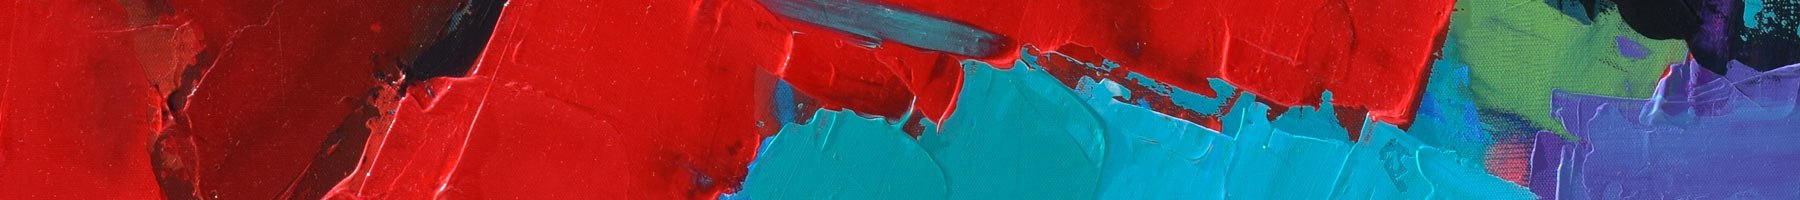 Detail from Red Variation by Elise Palmigiani